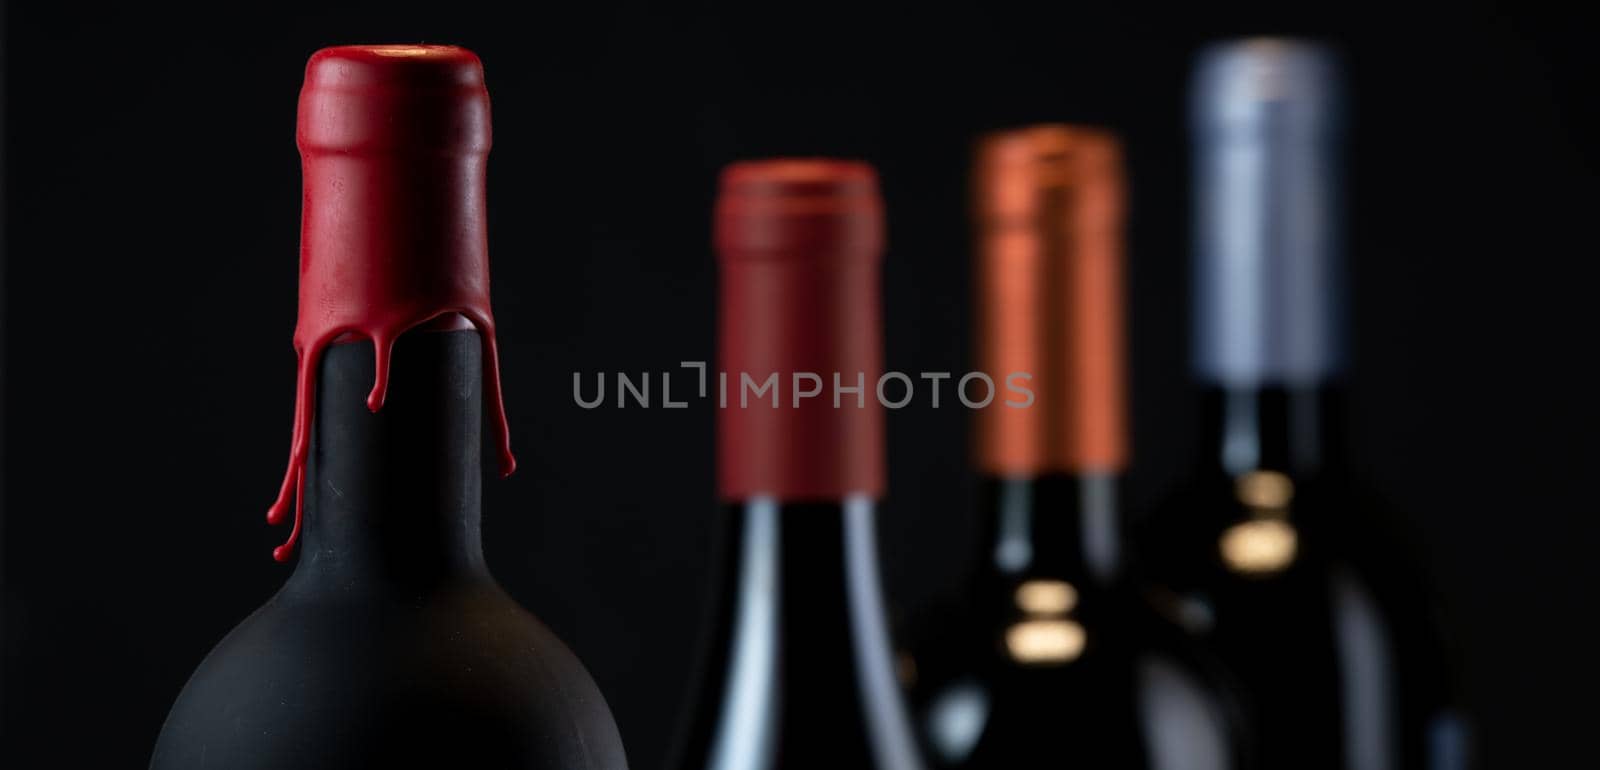 Set of collars red wine bottles isolated on black background, France